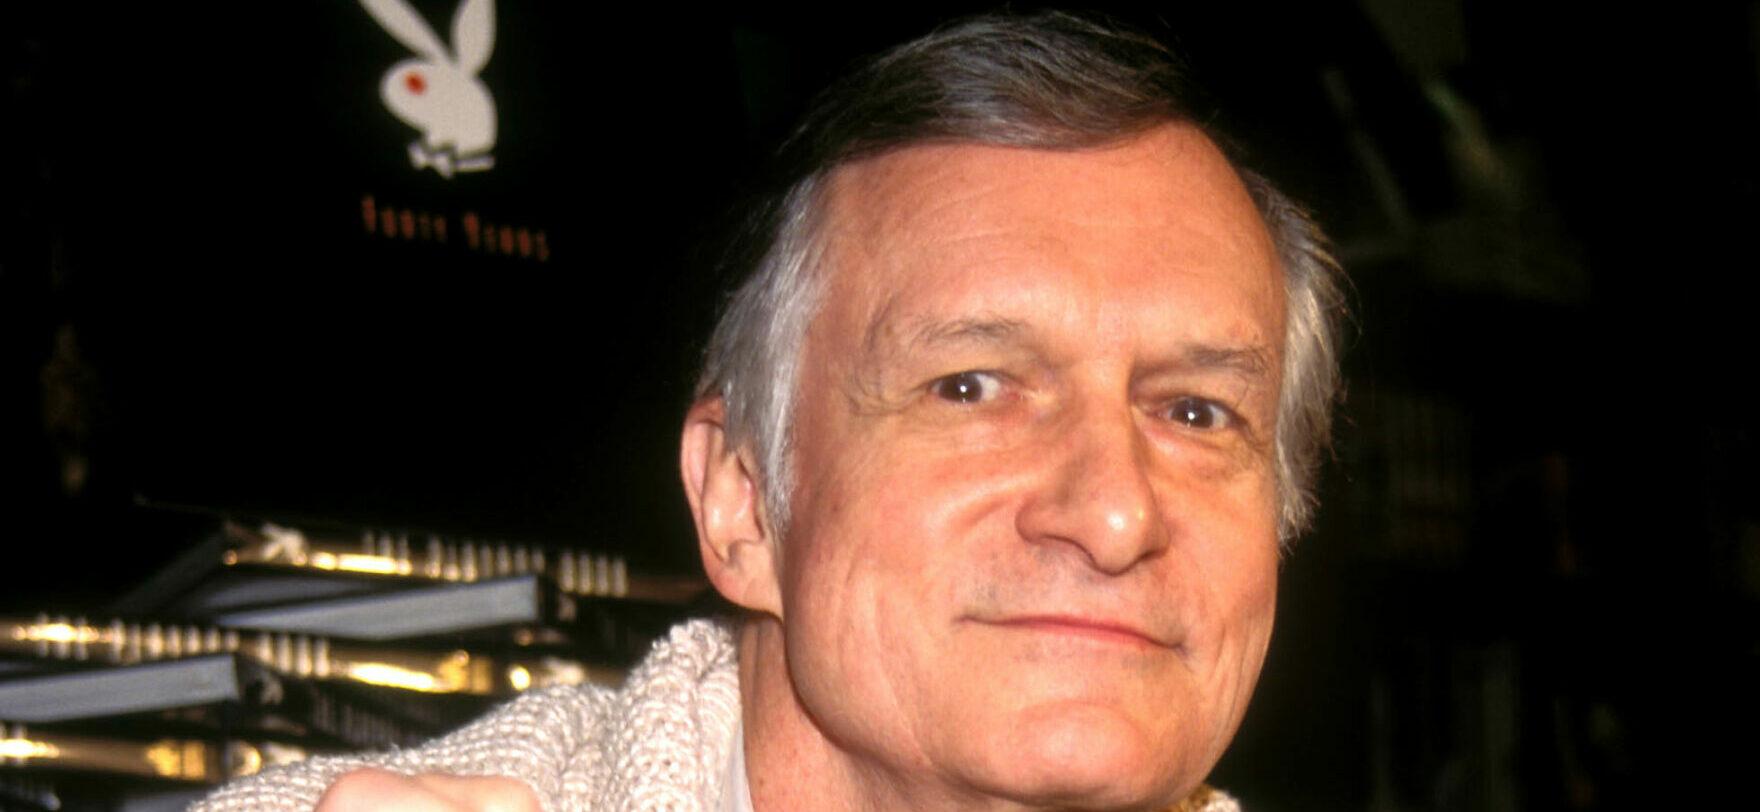 HUGH MARSTON HEFNER (born: April 9, 1926 died: September 27, 2017) was an American men's lifestyle magazine publisher, businessman, and playboy. A multi-millionaire, his net worth at the time of his death was over $43 million due to his success as the founder of Playboy. Hefner was also a political activist and philanthropist active in several causes and public issues. Pictured: HUGH HEFNER.f8866. 27 Sep 2017 Pictured: HUGH MARSTON HEFNER (born: April 9, 1926 died: September 27, 2017) was an American men's lifestyle magazine publisher, businessman, and playboy. A multi-millionaire, his net worth at the time of his death was over $43 million due to his success as the founder of Playboy. Hefner was also a political activist and philanthropist active in several causes and public issues. Pictured: L9297AR SD09/21/1994.HUGH HEFNER BOOK SIGNING ''PLAYBOY:FORTY YEARS-THE COMPLETE HISTORY''. RENUALT. Photo credit: ZUMAPRESS.com / MEGA TheMegaAgency.com +1 888 505 6342 (Mega Agency TagID: MEGA90985_001.jpg) [Photo via Mega Agency]